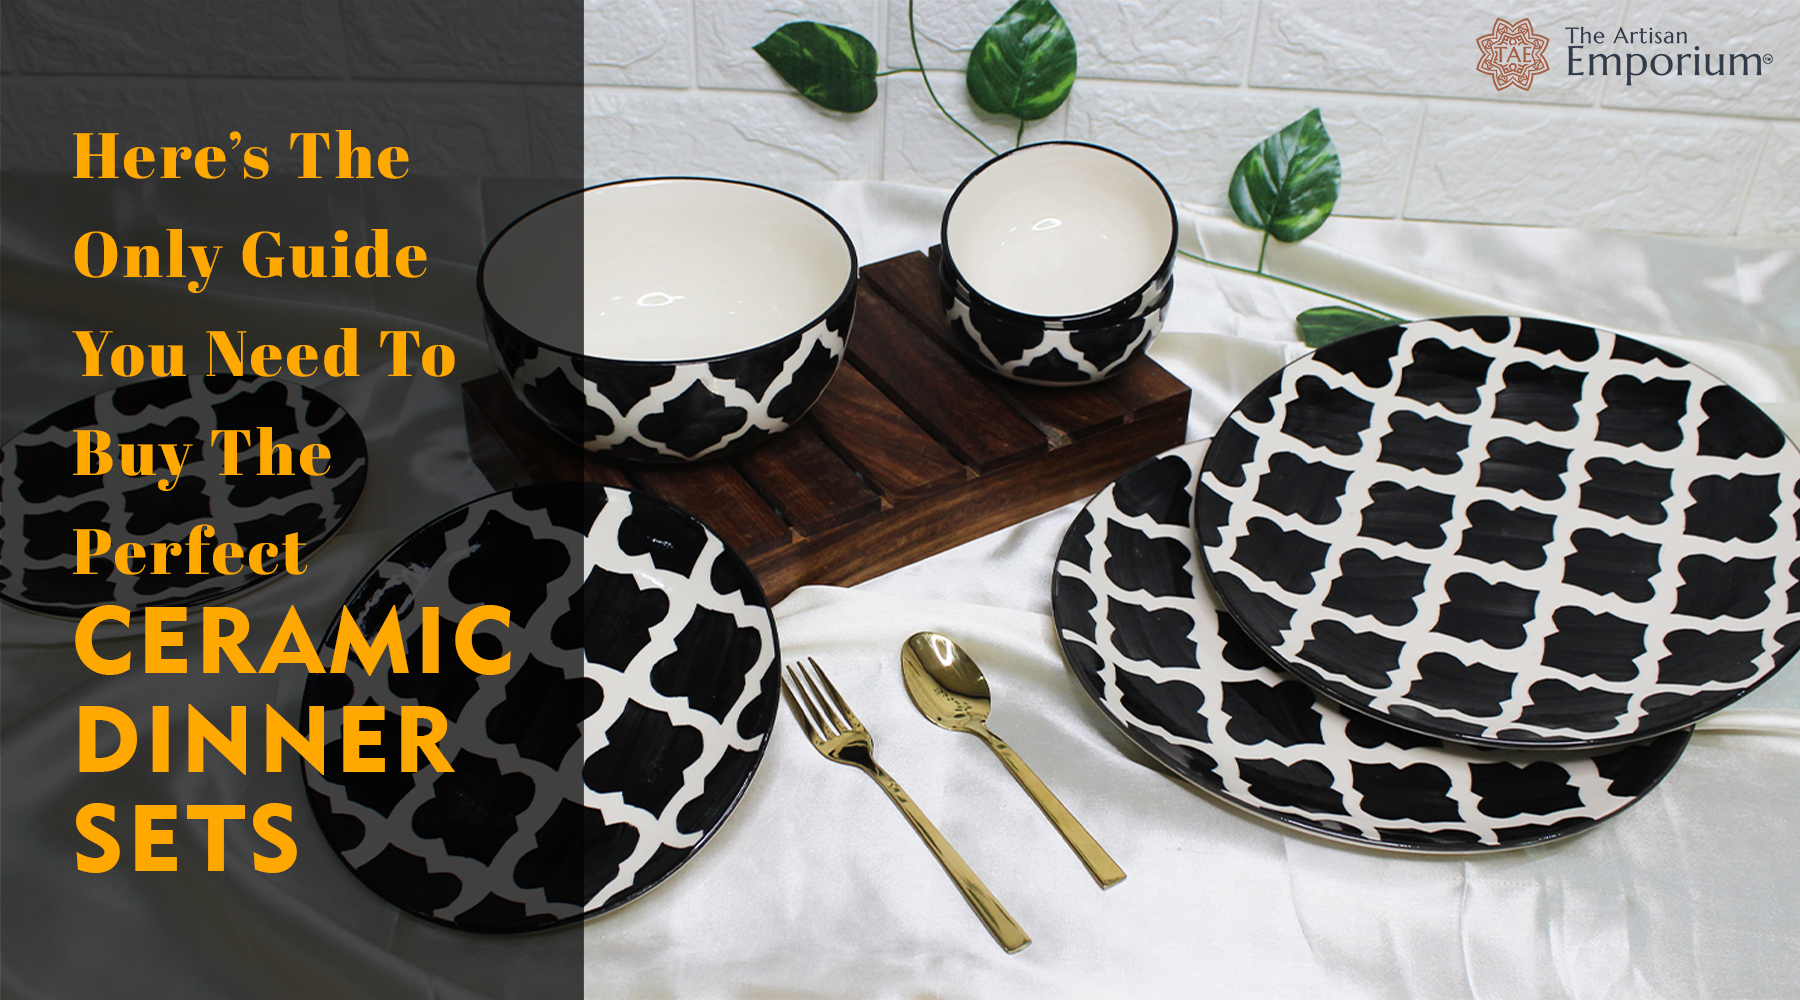 Here’s The Only Guide You Need to Buy The Perfect Ceramic Dinner Sets